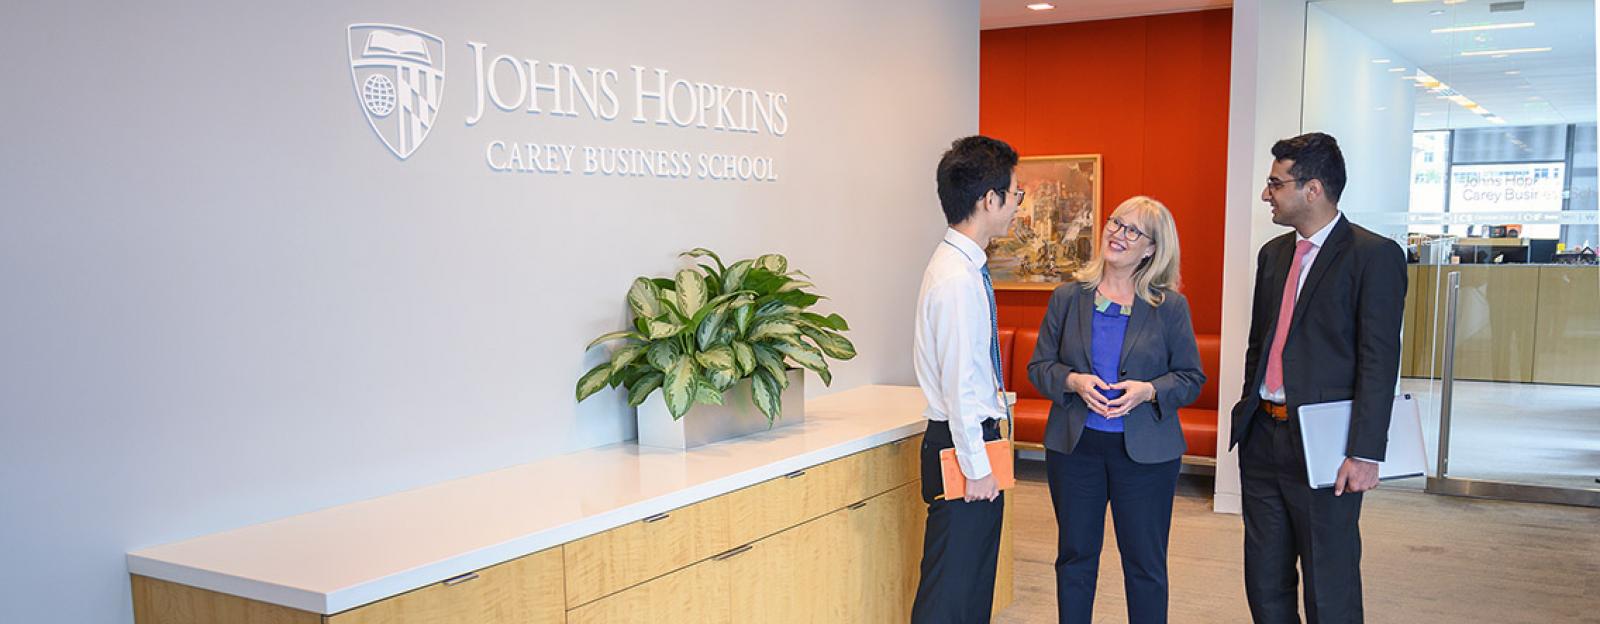 students talking with a career development coach at johns hopkins carey business school